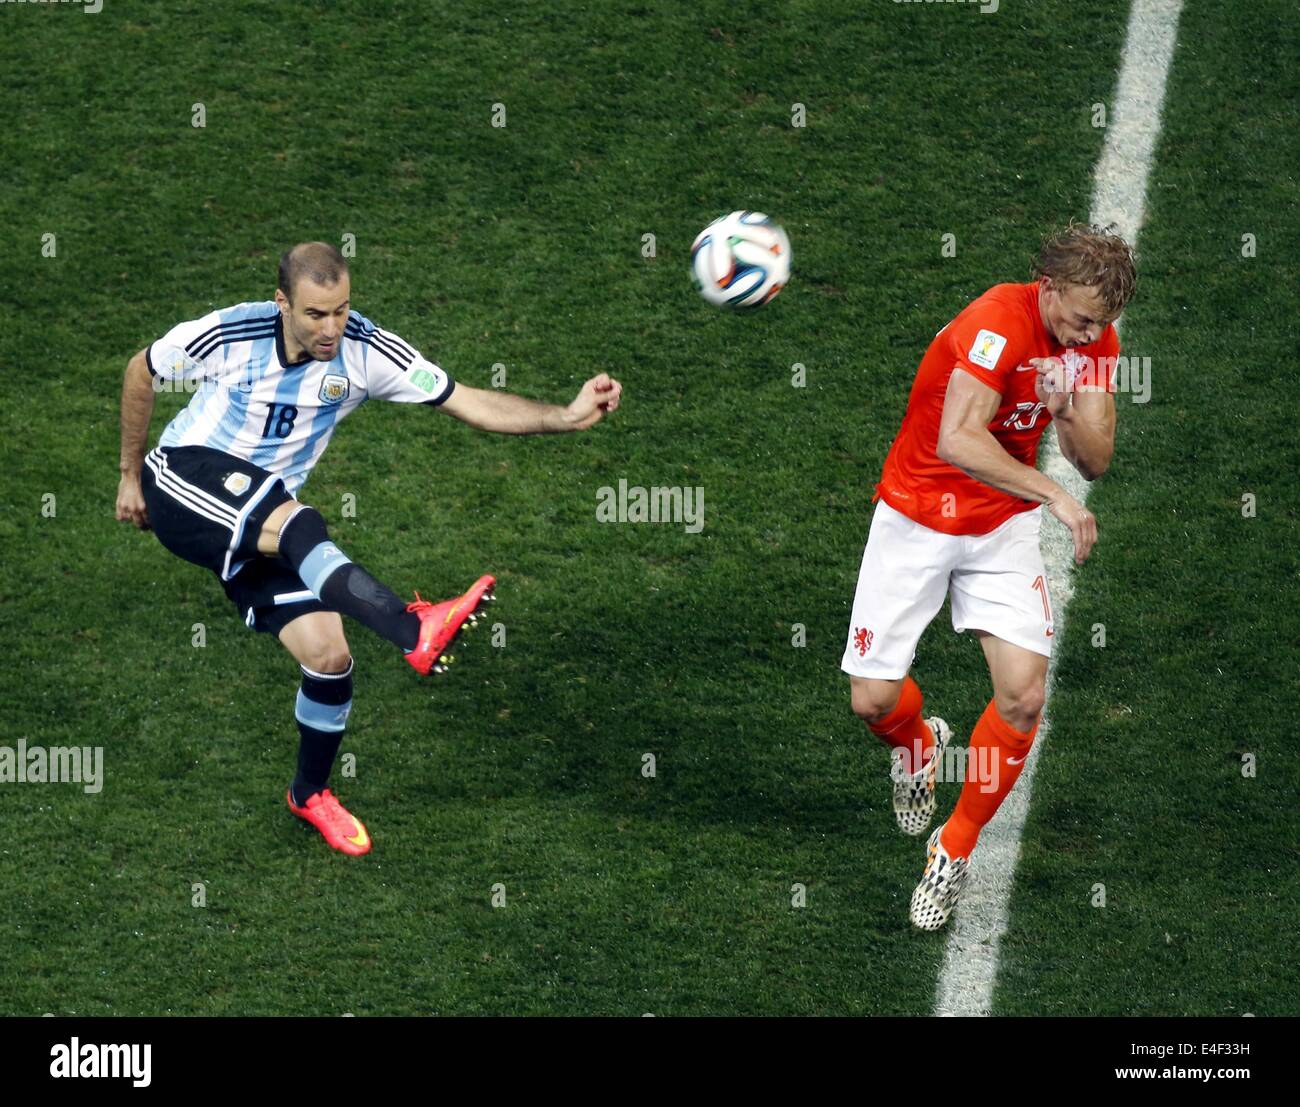 Sao Paulo, Brazil. 9th July, 2014. Netherlands' Dirk Kuyt vies with Argentina's Rodrigo Palacio during a semifinal match between Netherlands and Argentina of 2014 FIFA World Cup at the Arena de Sao Paulo Stadium in Sao Paulo, Brazil, on July 9, 2014. Credit:  Liao Yujie/Xinhua/Alamy Live News Stock Photo